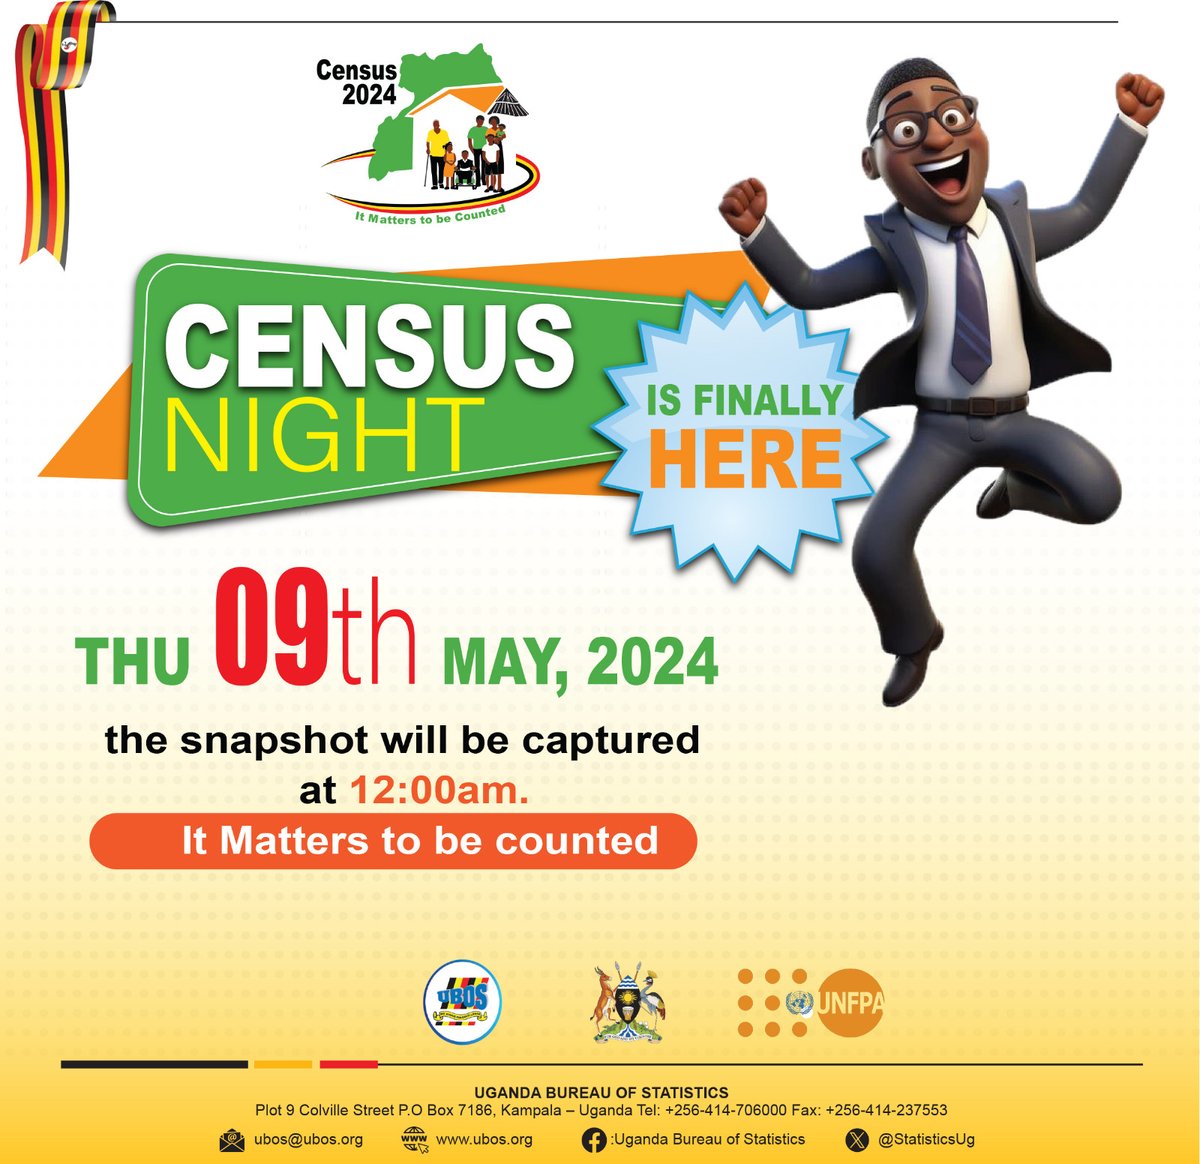 Good morning Uganda. It's a thrilling moment. The much-awaited #UgandaCensus2024 is finally here. This evening marks the census night. Wherever you find yourself when the clock strikes midnight (12:00am) will be used as your reference location during the enumeration.